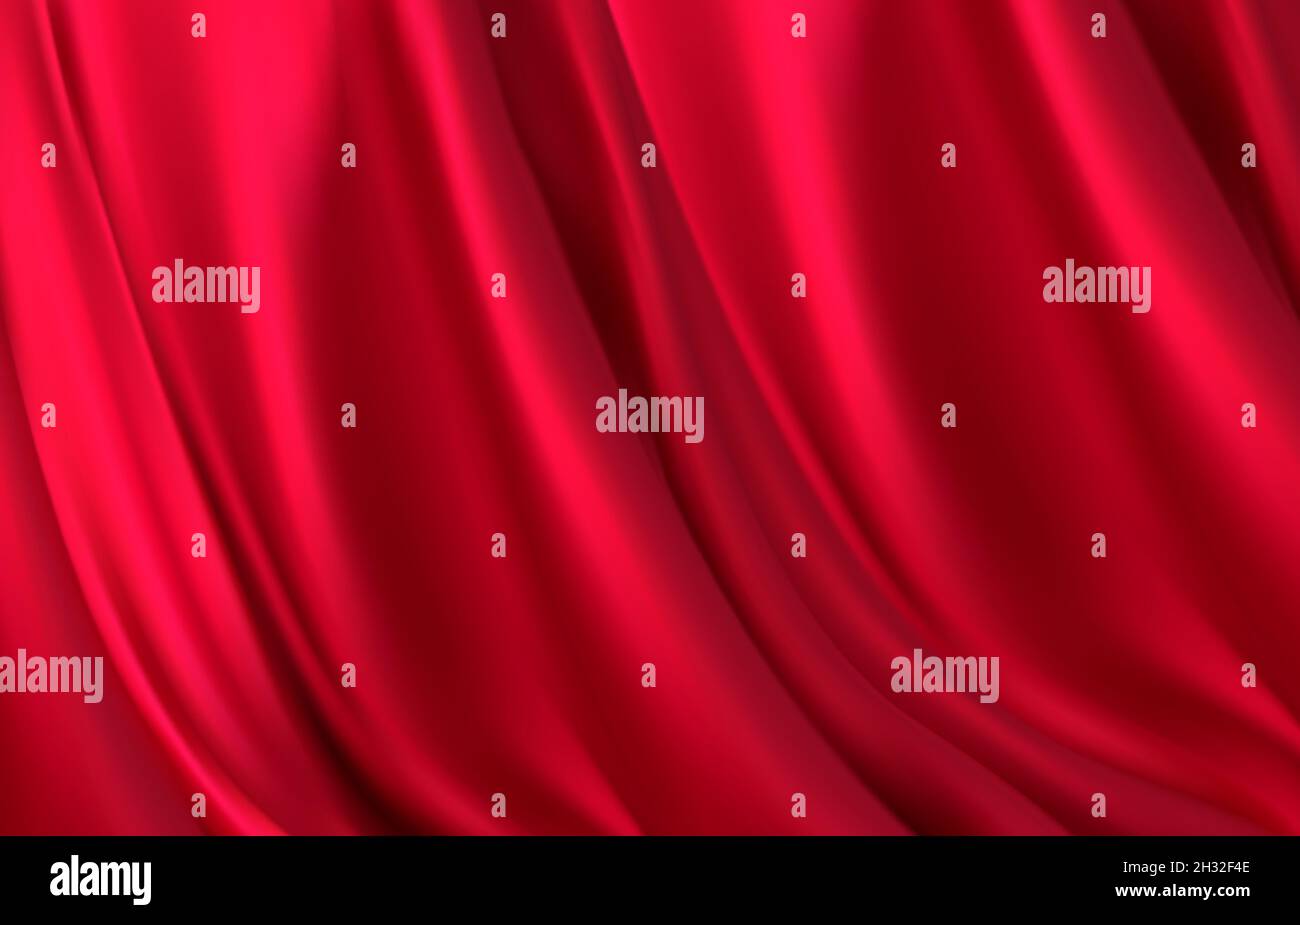 Realistic red silk fabric. Background from folds of fabric. Red silk drapery background. Vector illustration Stock Vector